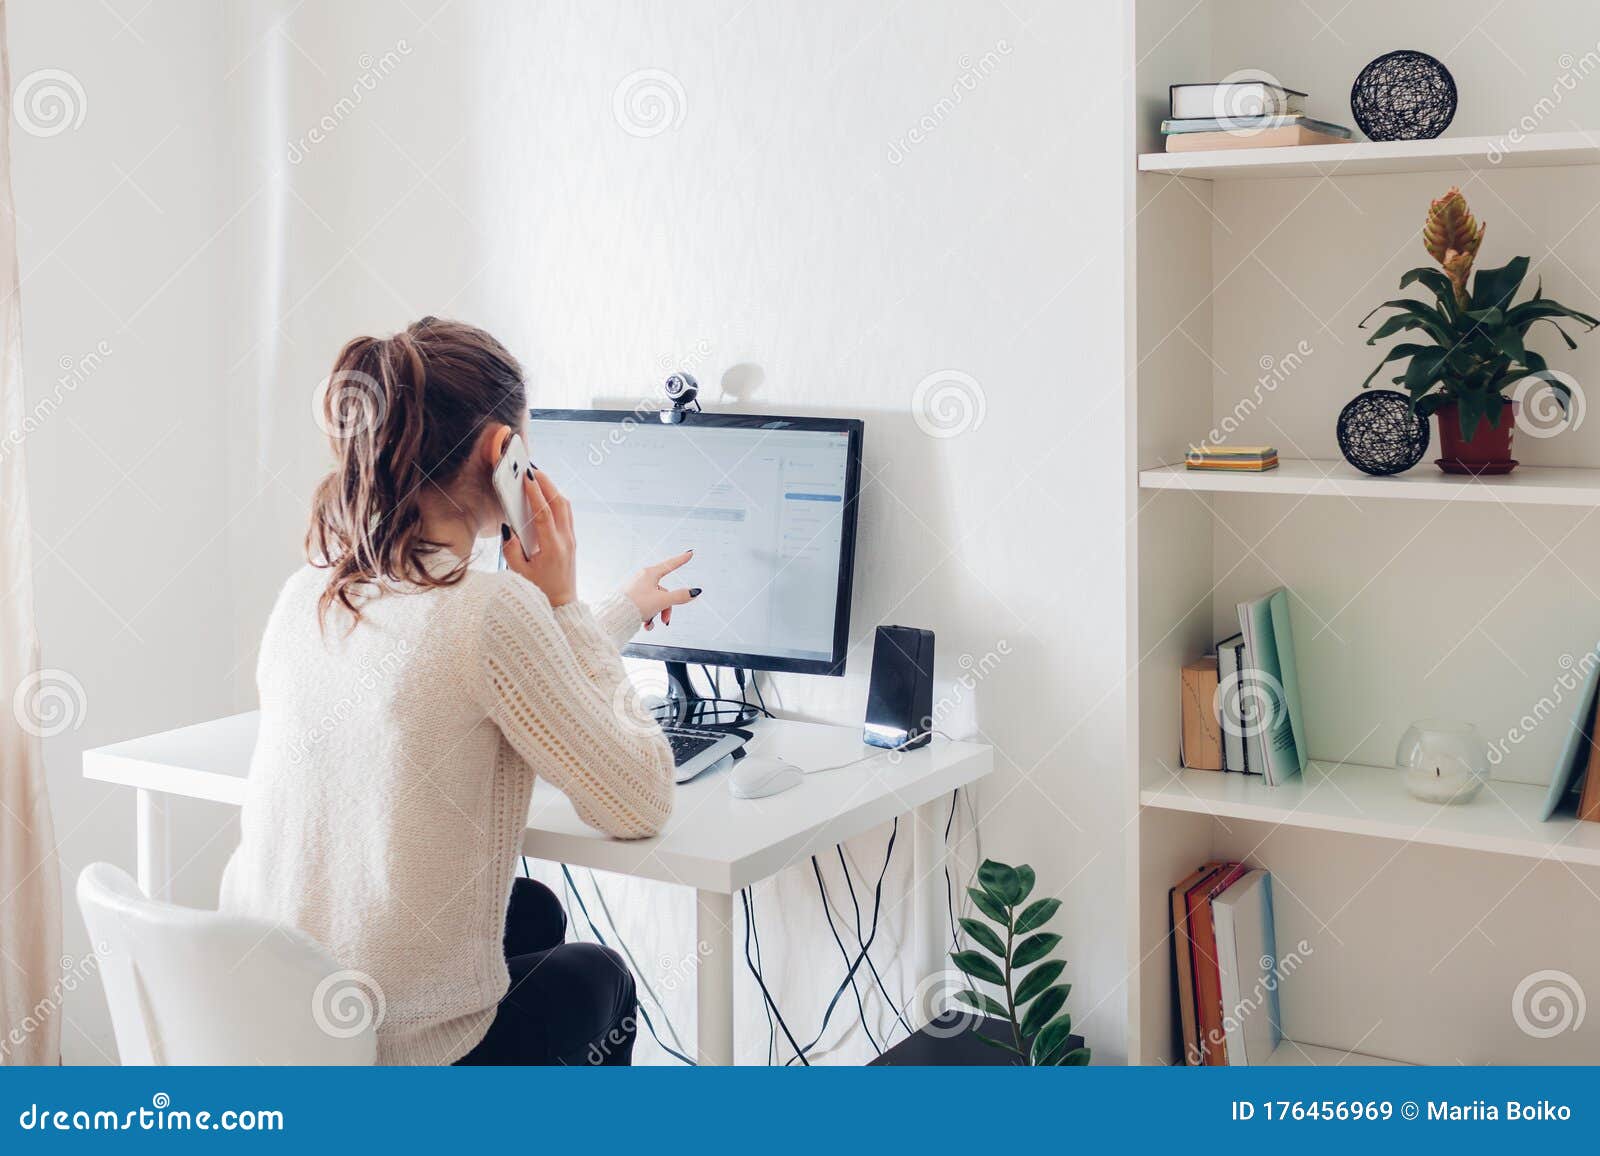 work from home during coromavirus pandemic. woman stays home. workspace of freelancer. office interior with computer